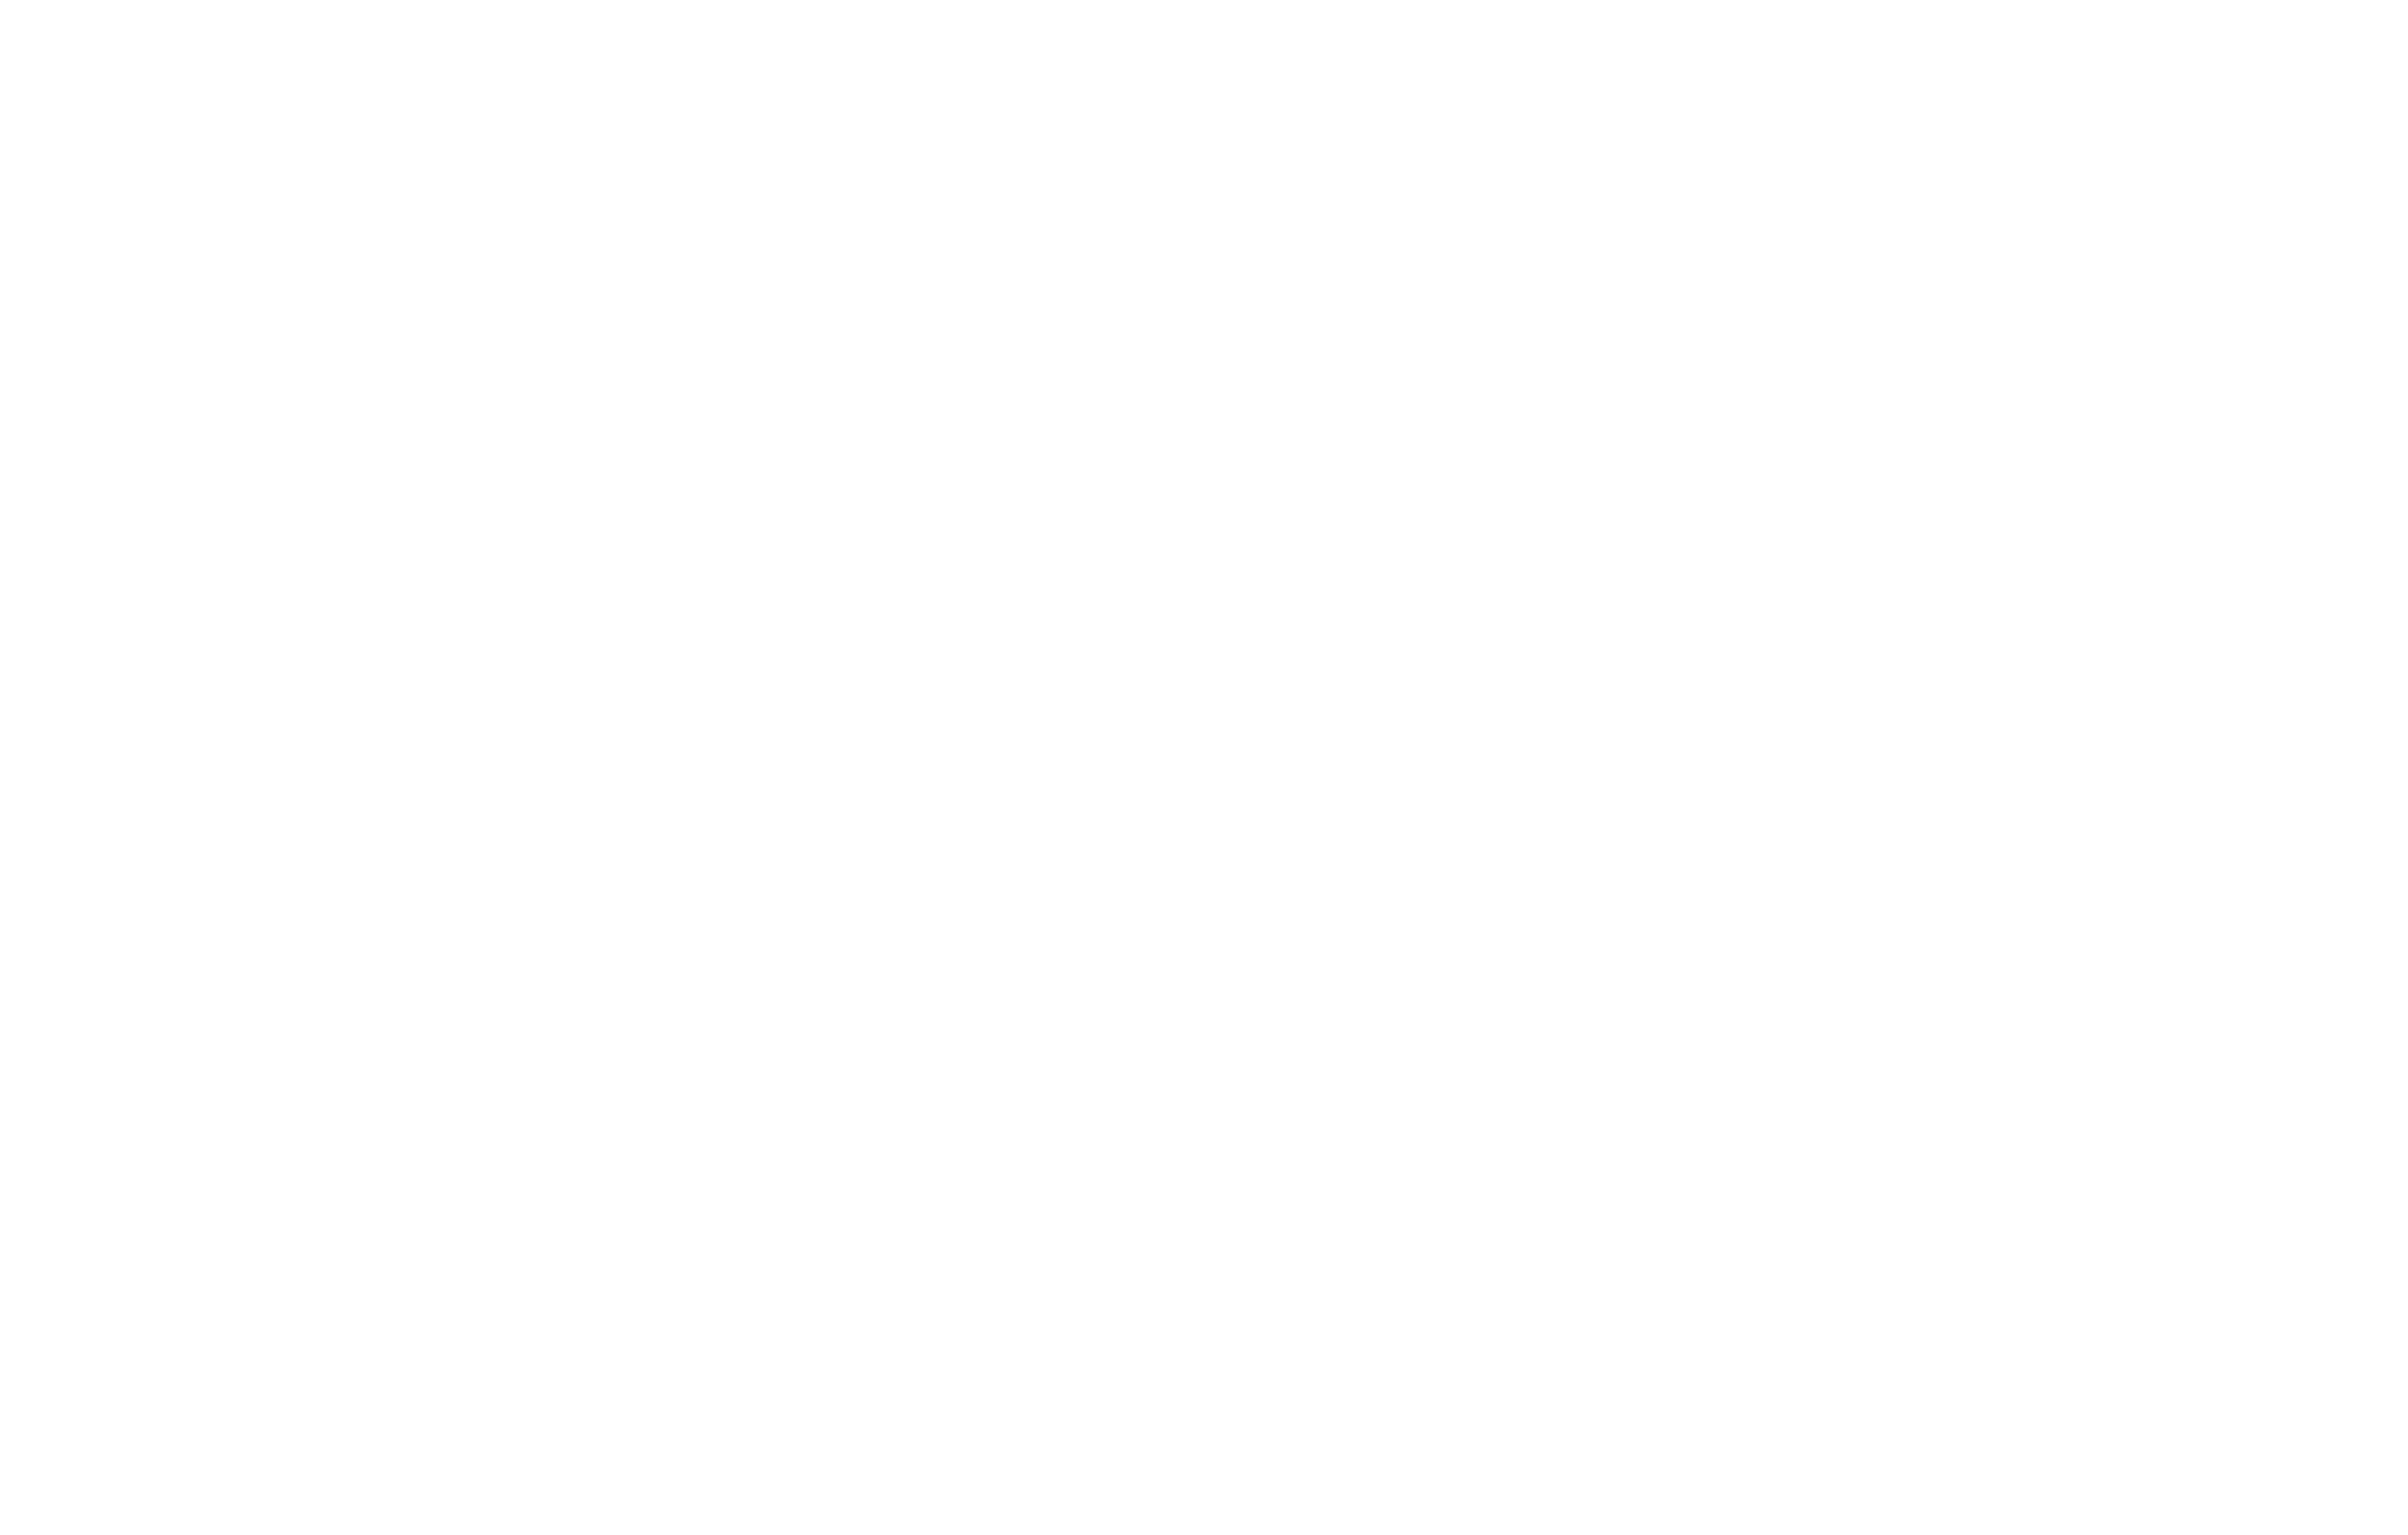 The Lodges at Transport World